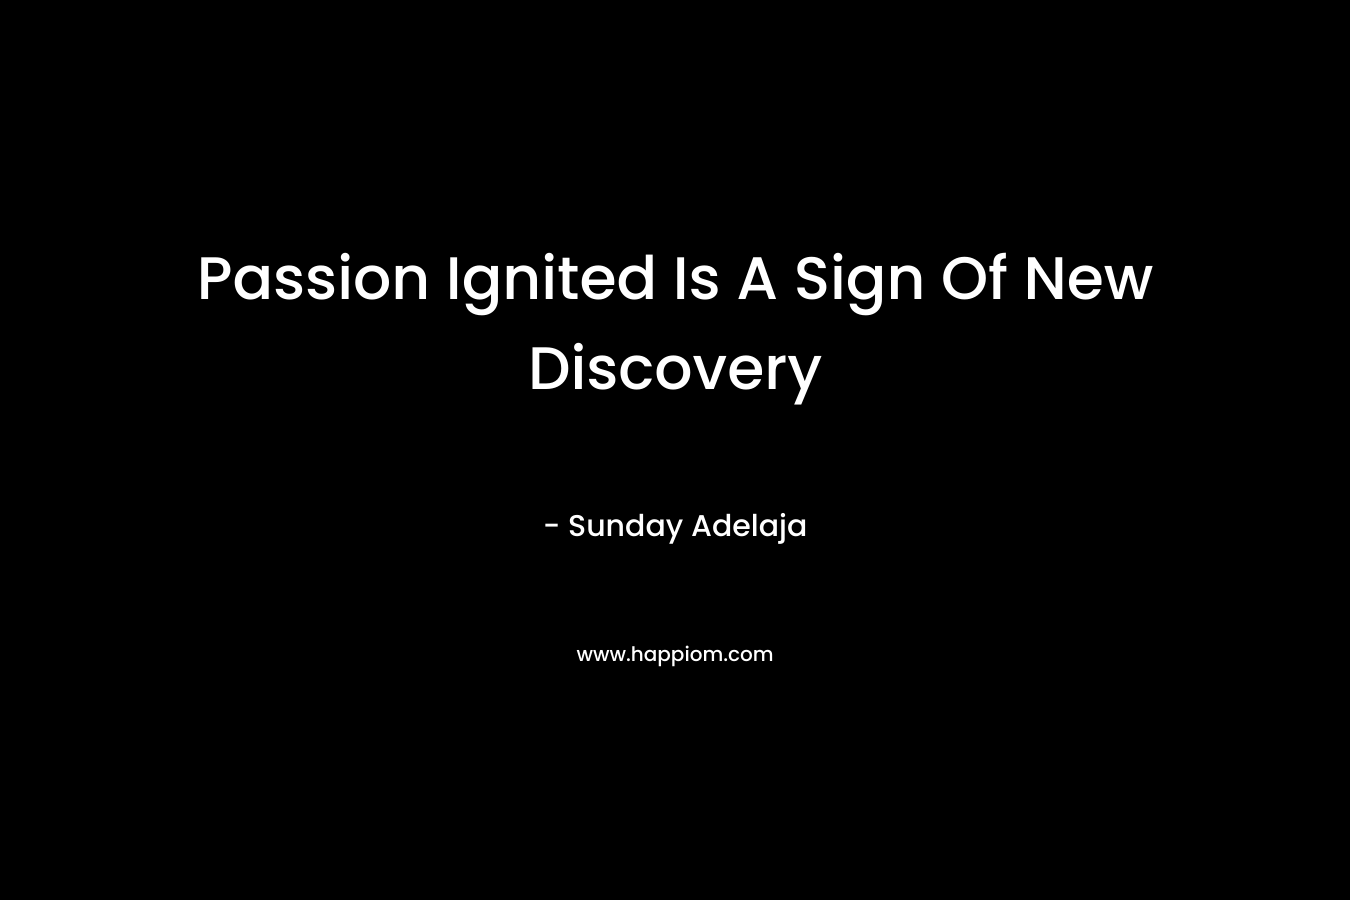 Passion Ignited Is A Sign Of New Discovery